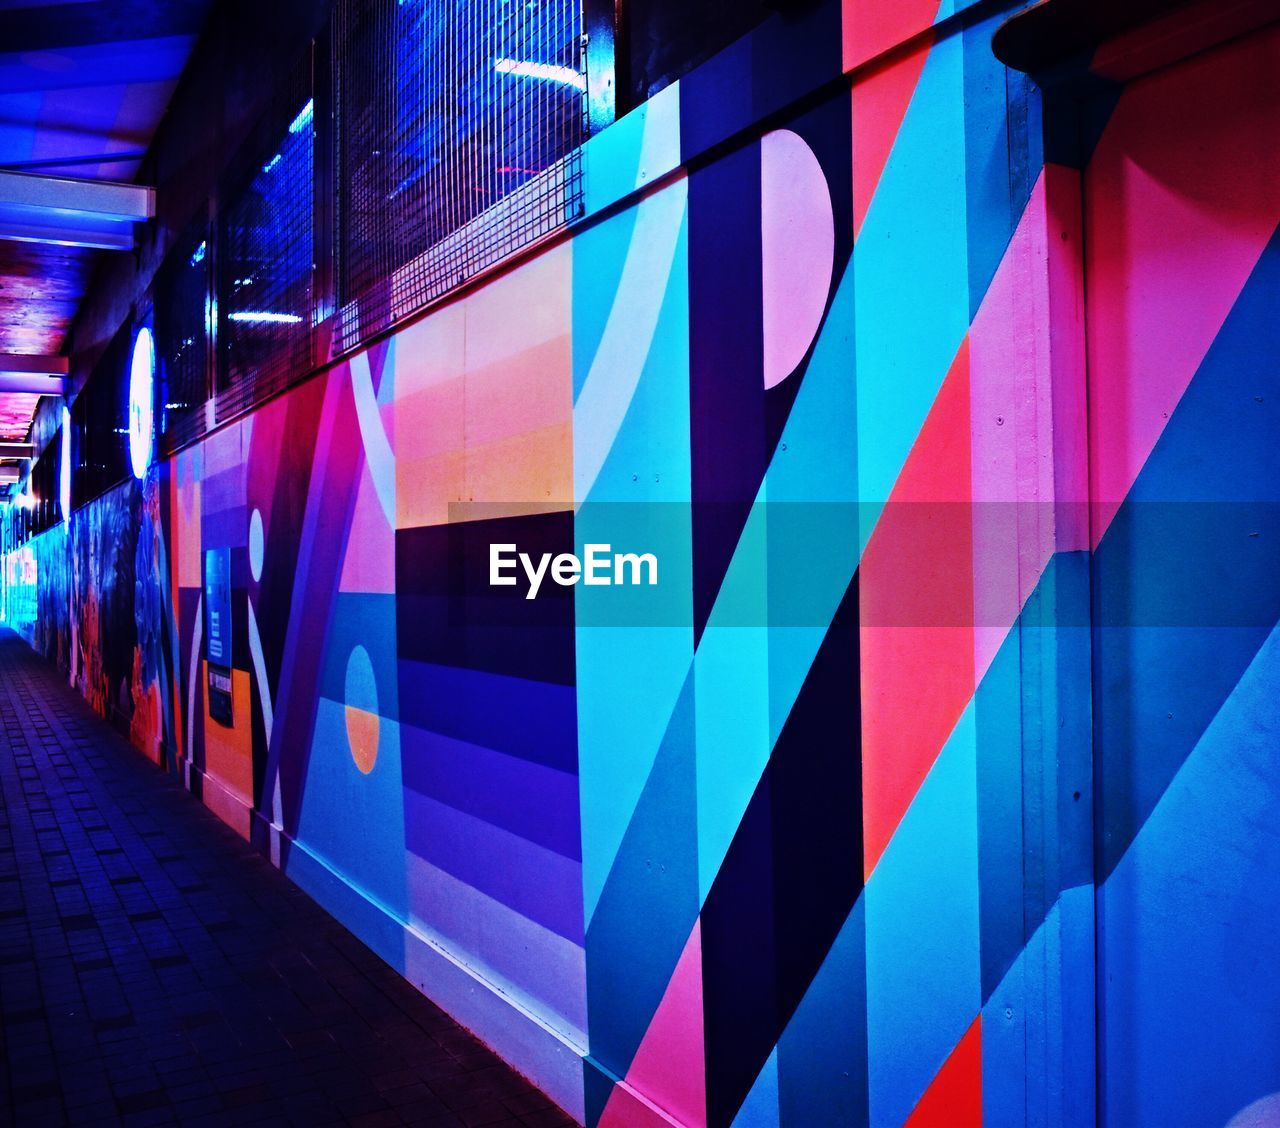 MULTI COLORED ILLUMINATED WALL BY FOOTPATH